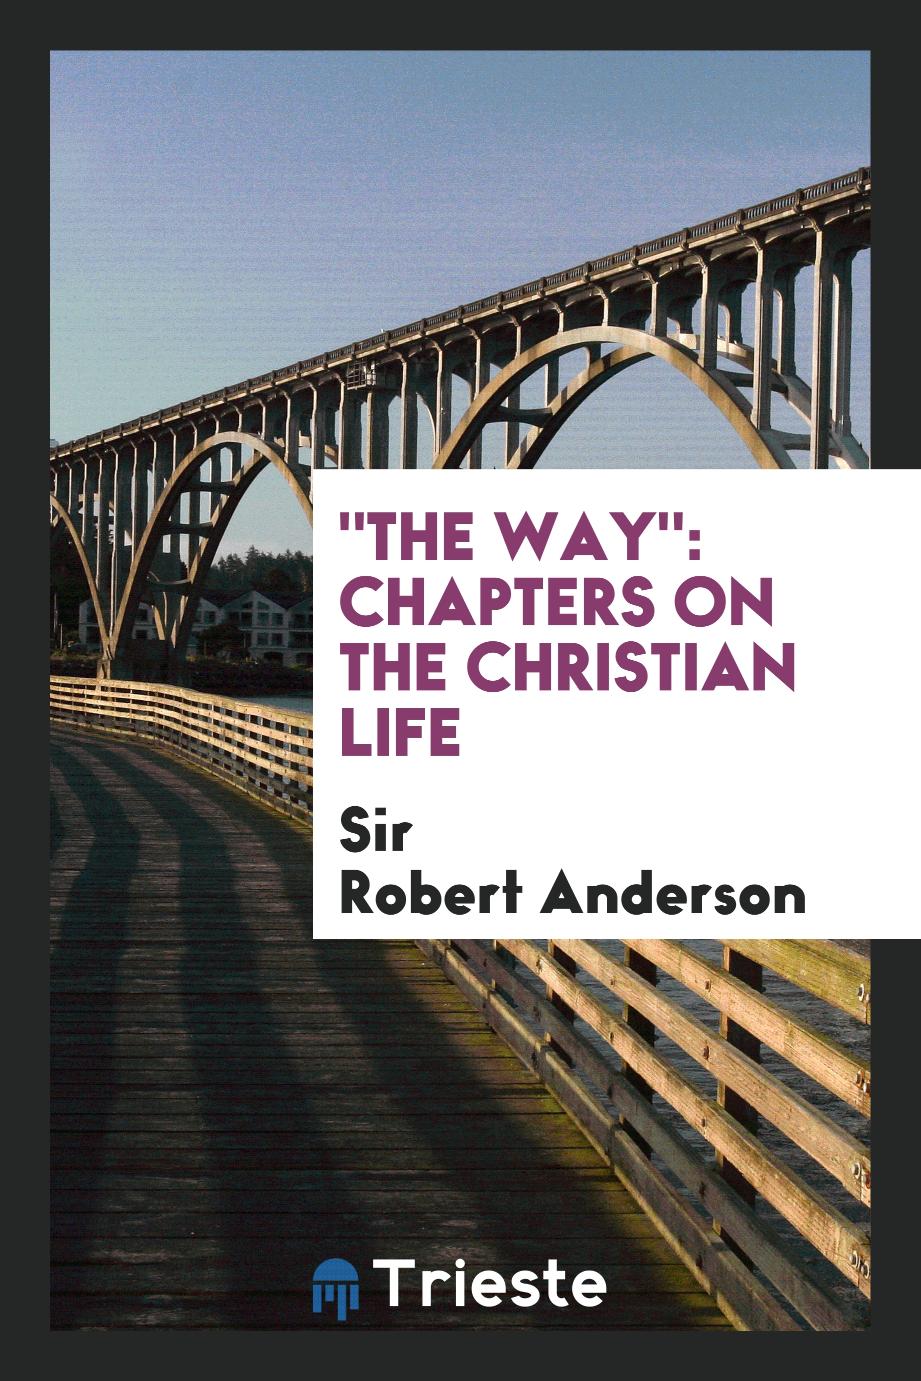 "The way": chapters on the Christian life